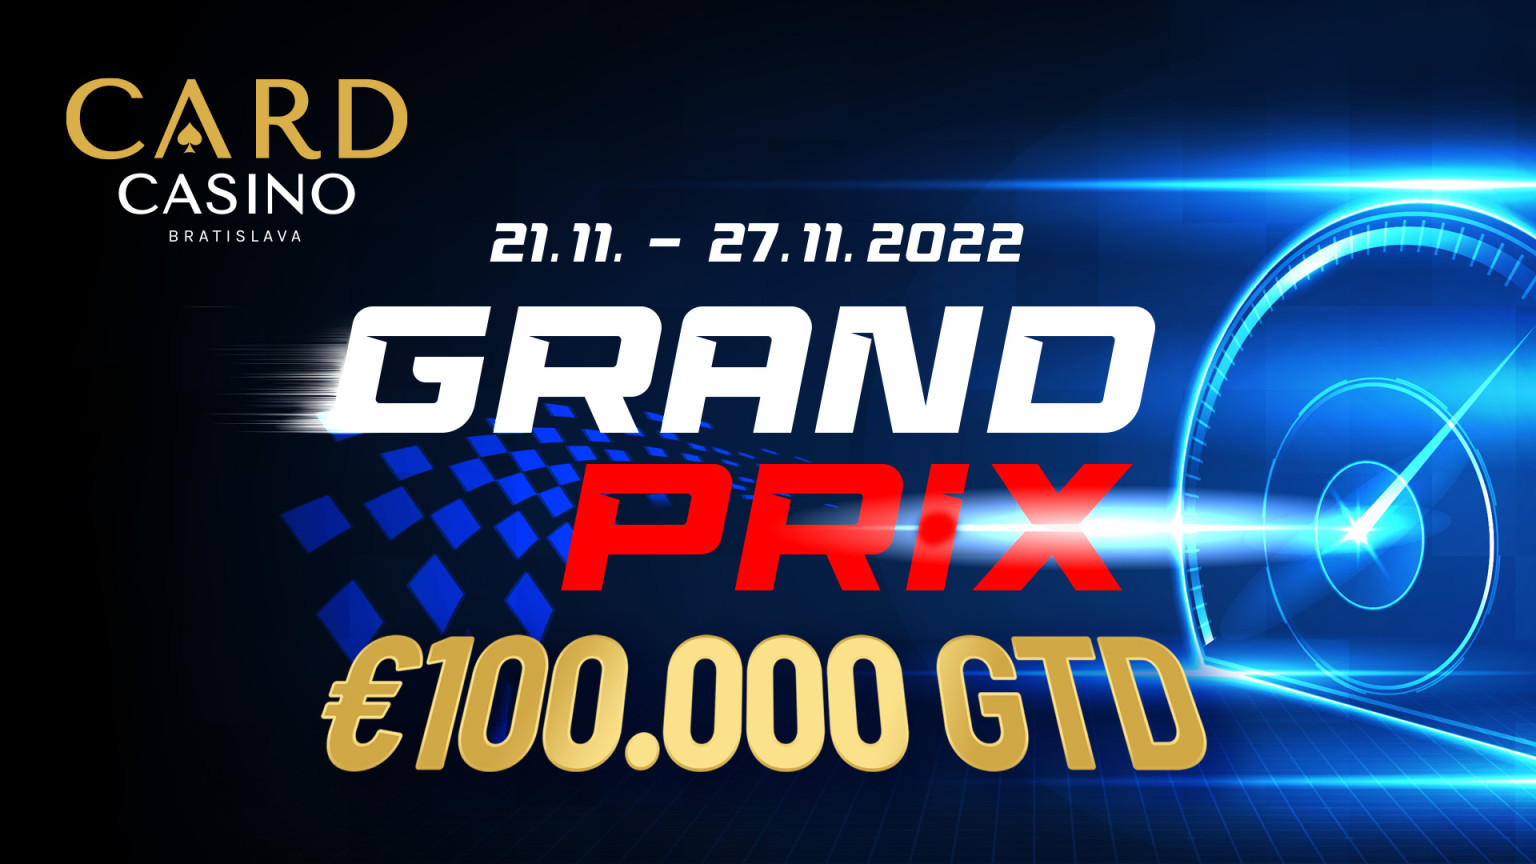 It's GRAND PRIX €100,000 GTD week. High Roller is also played